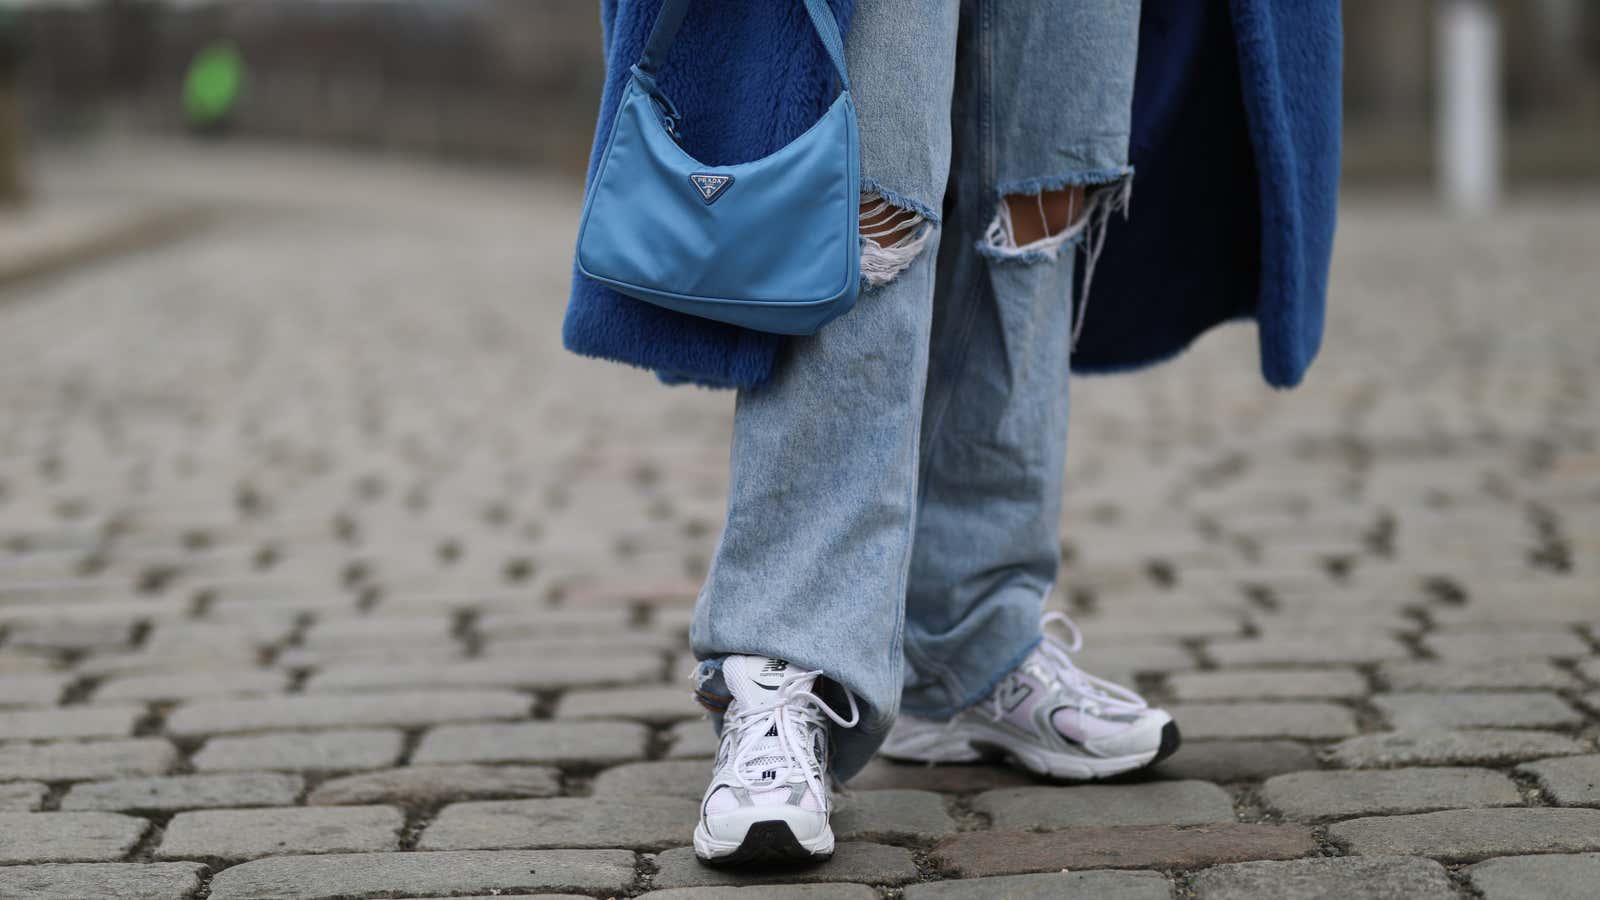 High-rise, loose-fit jeans are the “it” look right now, according to the CEO of Levi’s.